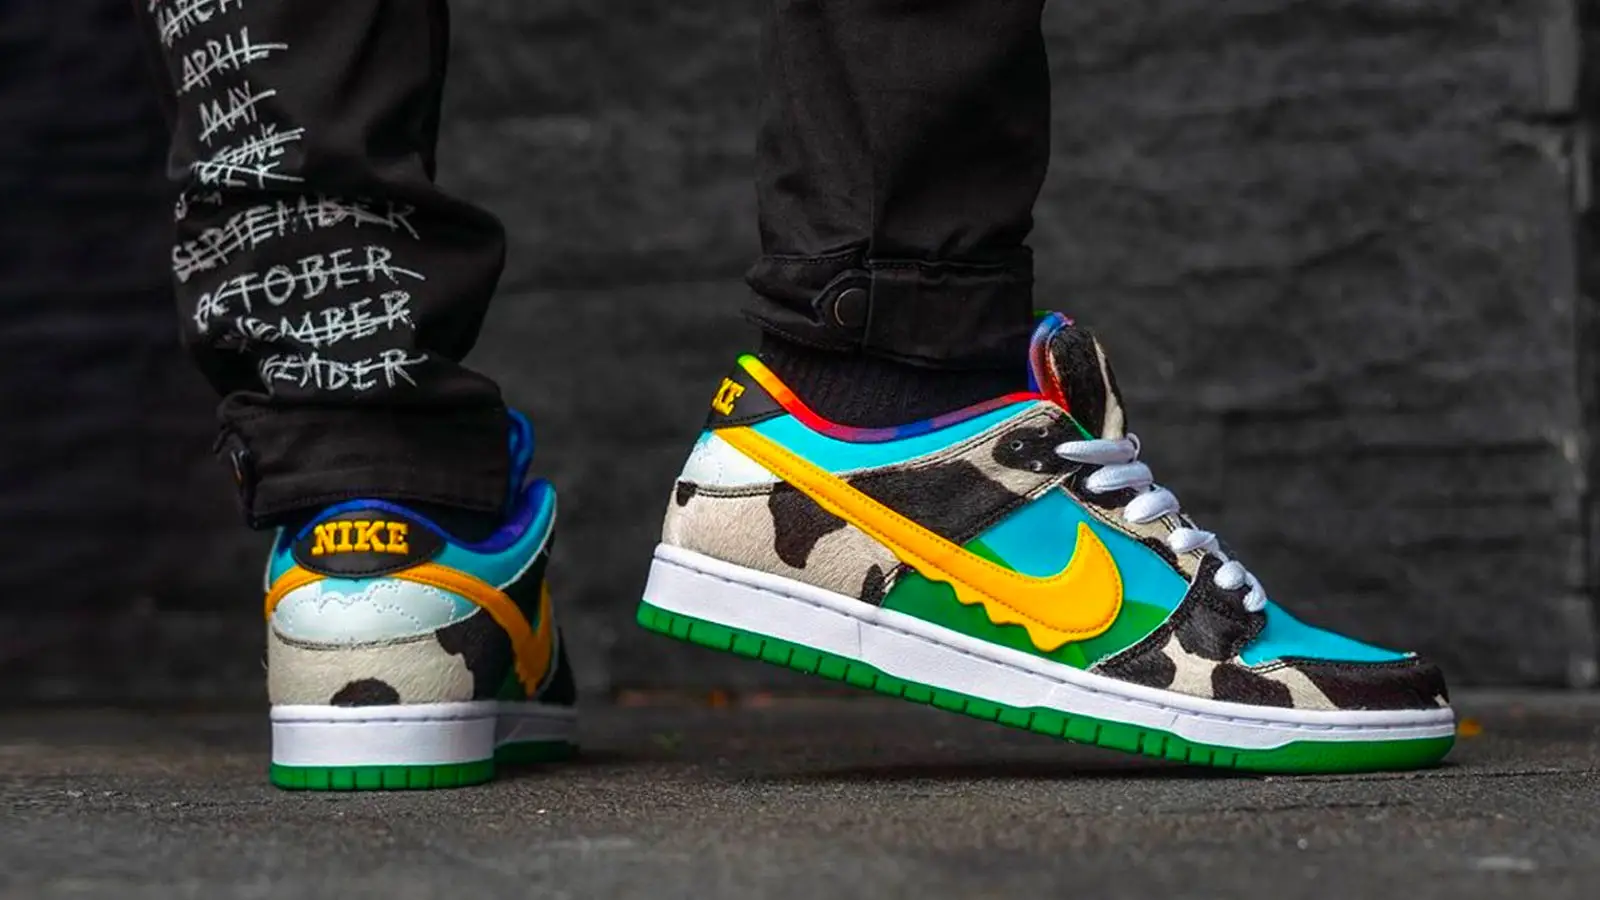 Get an On-Foot Look at the Ben & Jerry's x Nike SB Dunk Low 